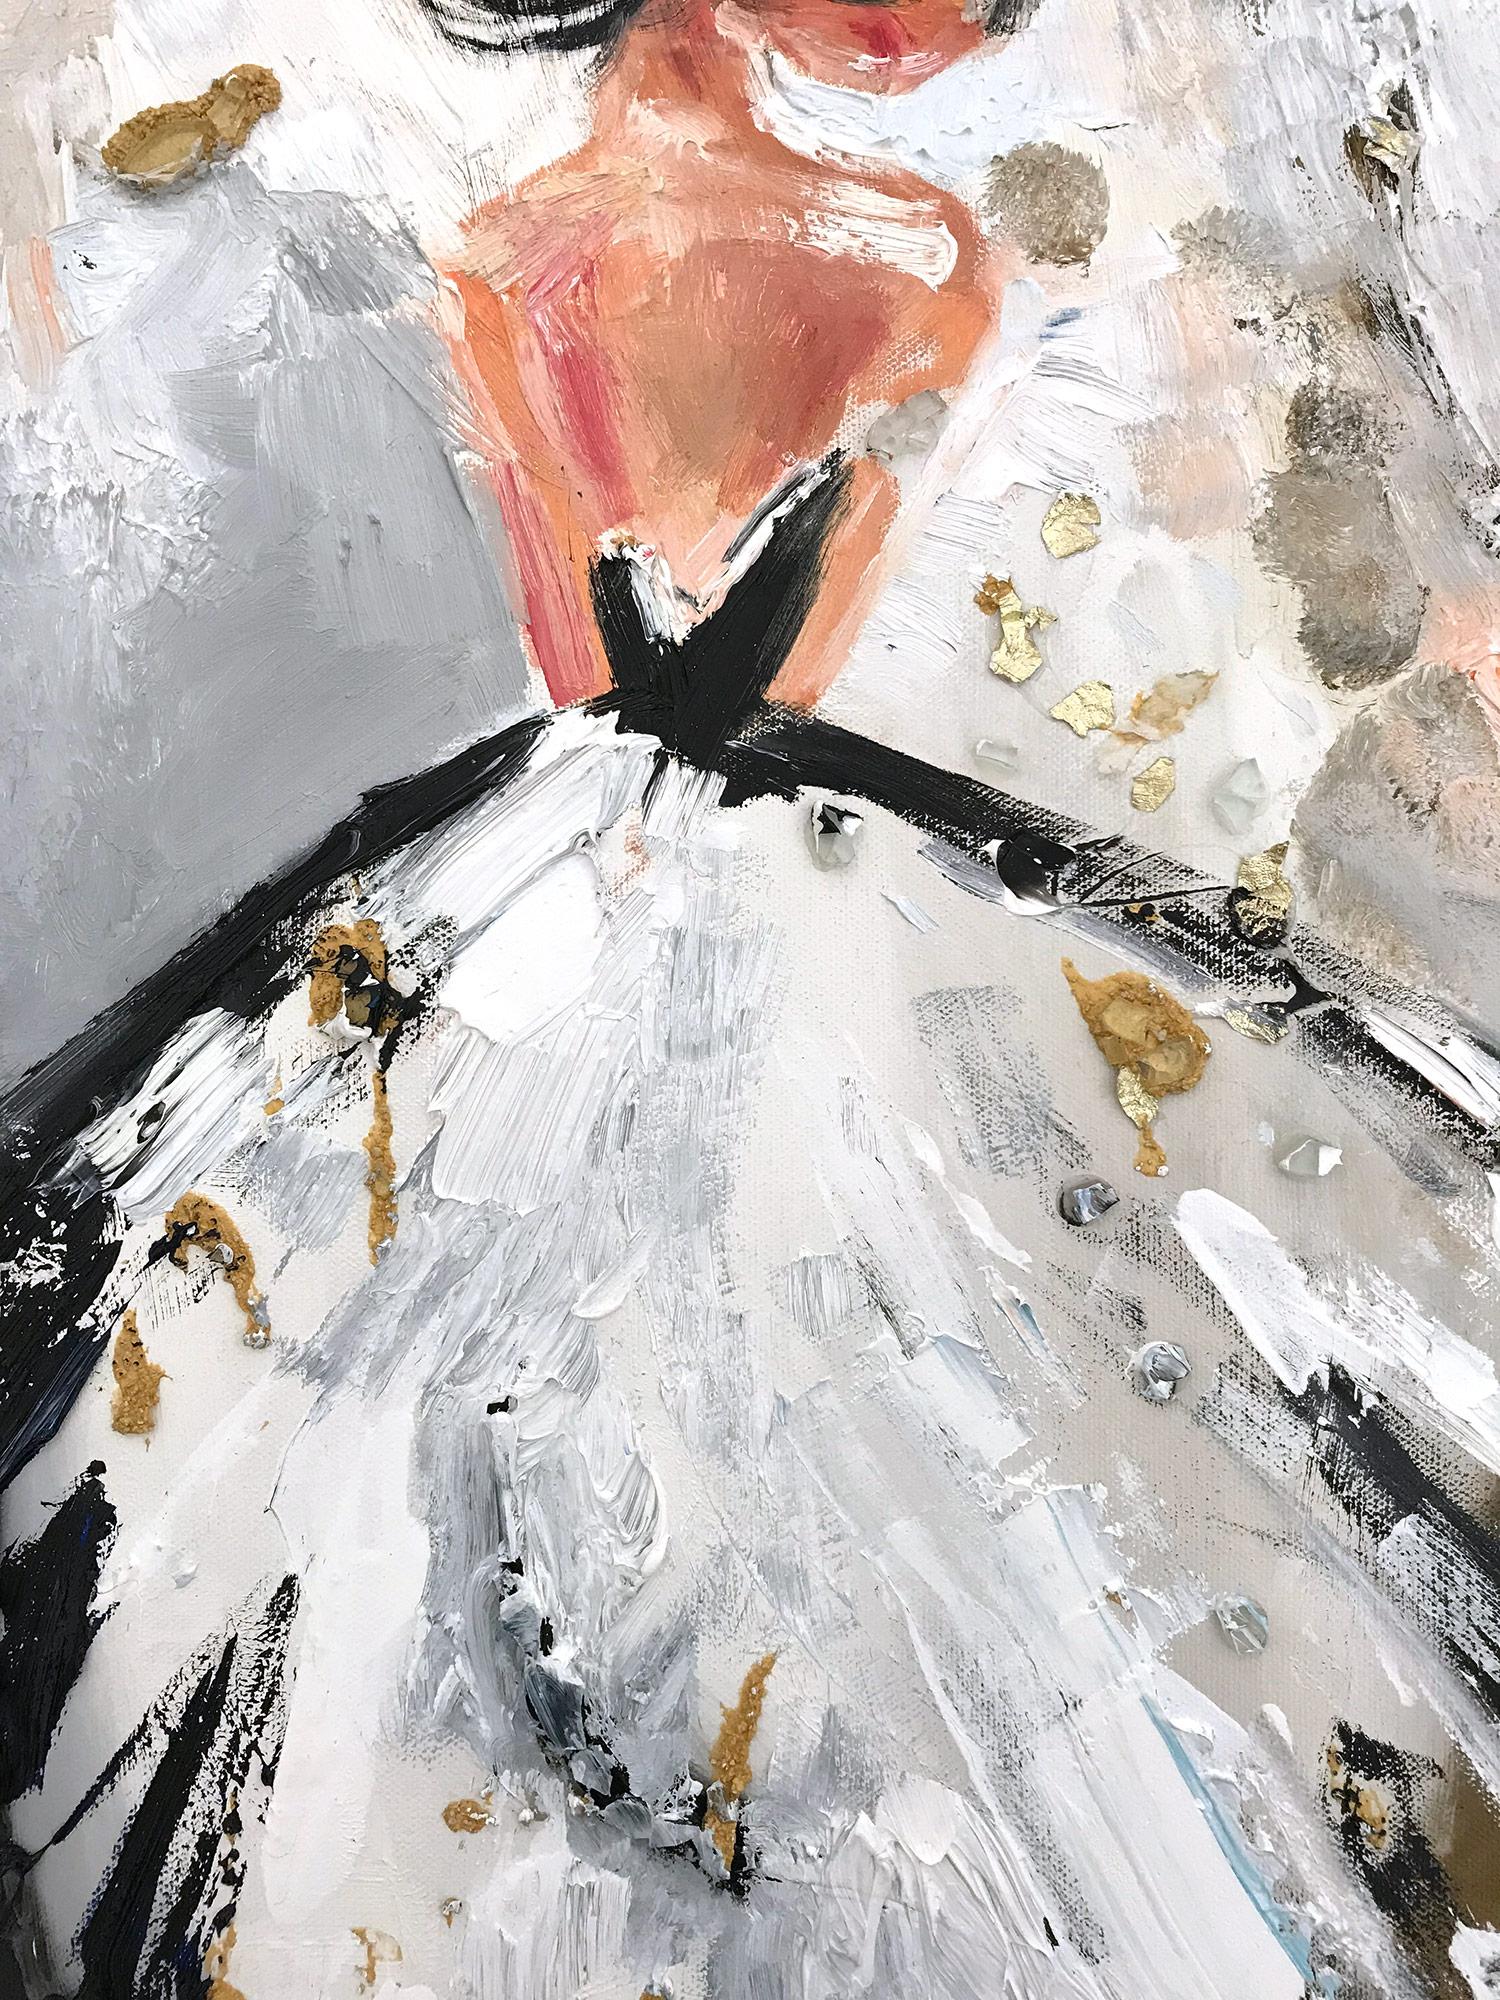 An abstract, whimsical and bold depiction of a woman standing gracefully in a white gown against a sunburst background with delicate details. This piece captures the essence of fashion in Pairs. Done in a very modern and impressionistic style, with